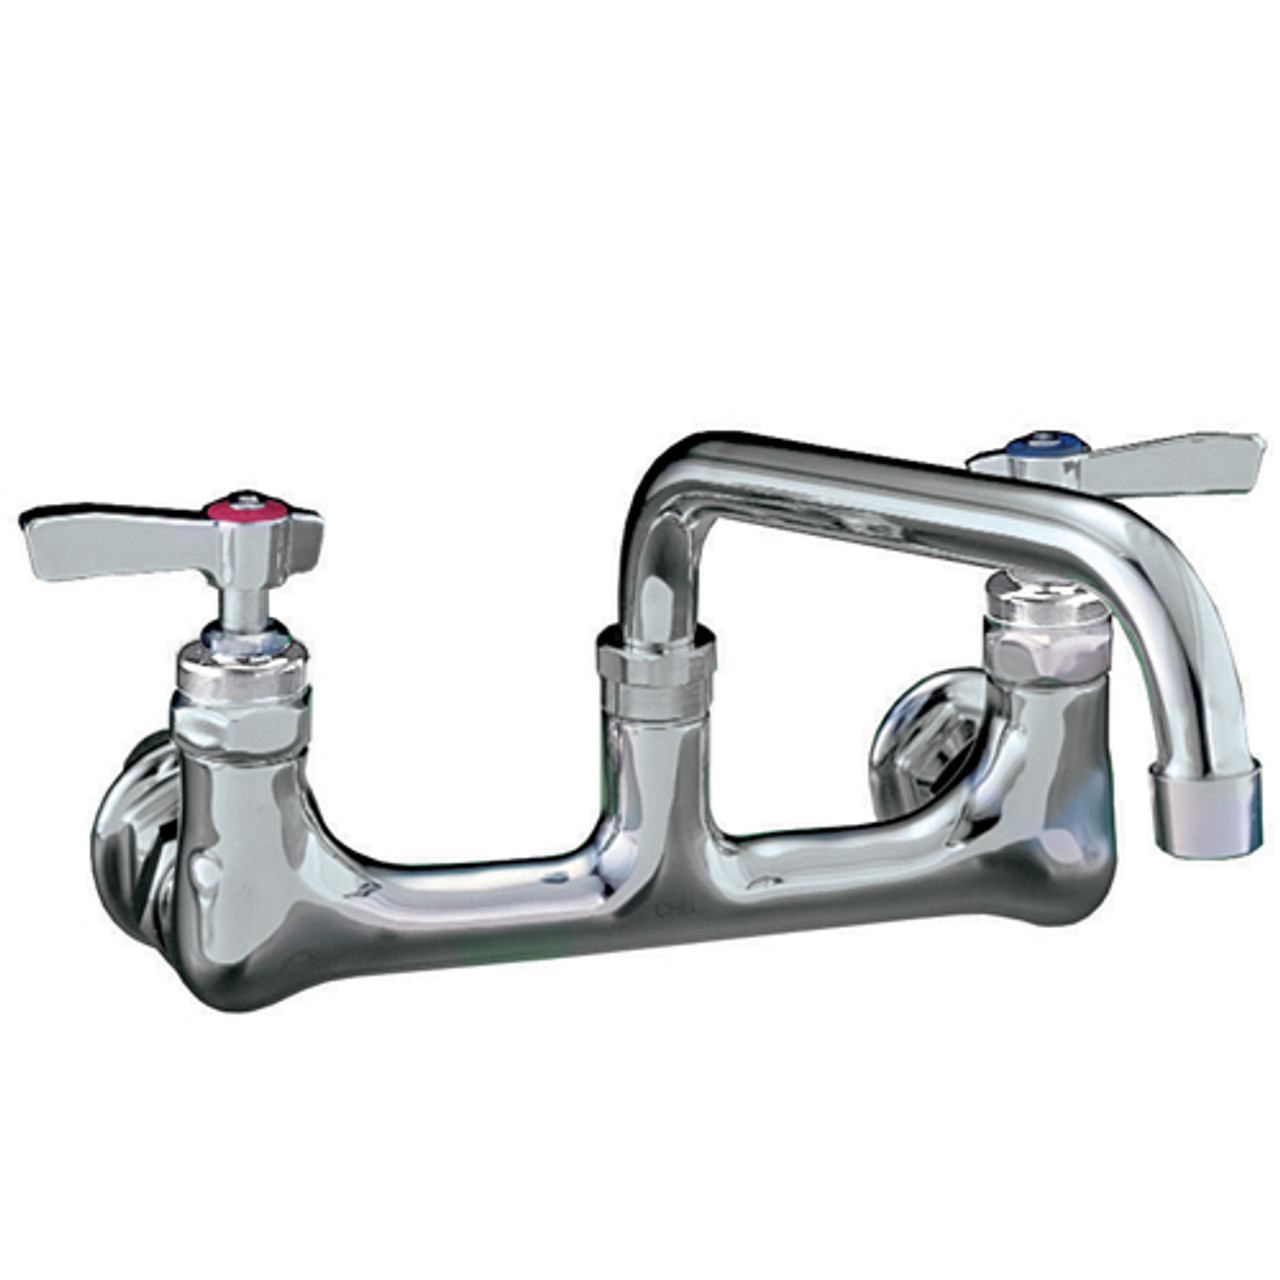 CHG (Component Hardware Group) KL54-8106 WALL MOUNT FAUCET